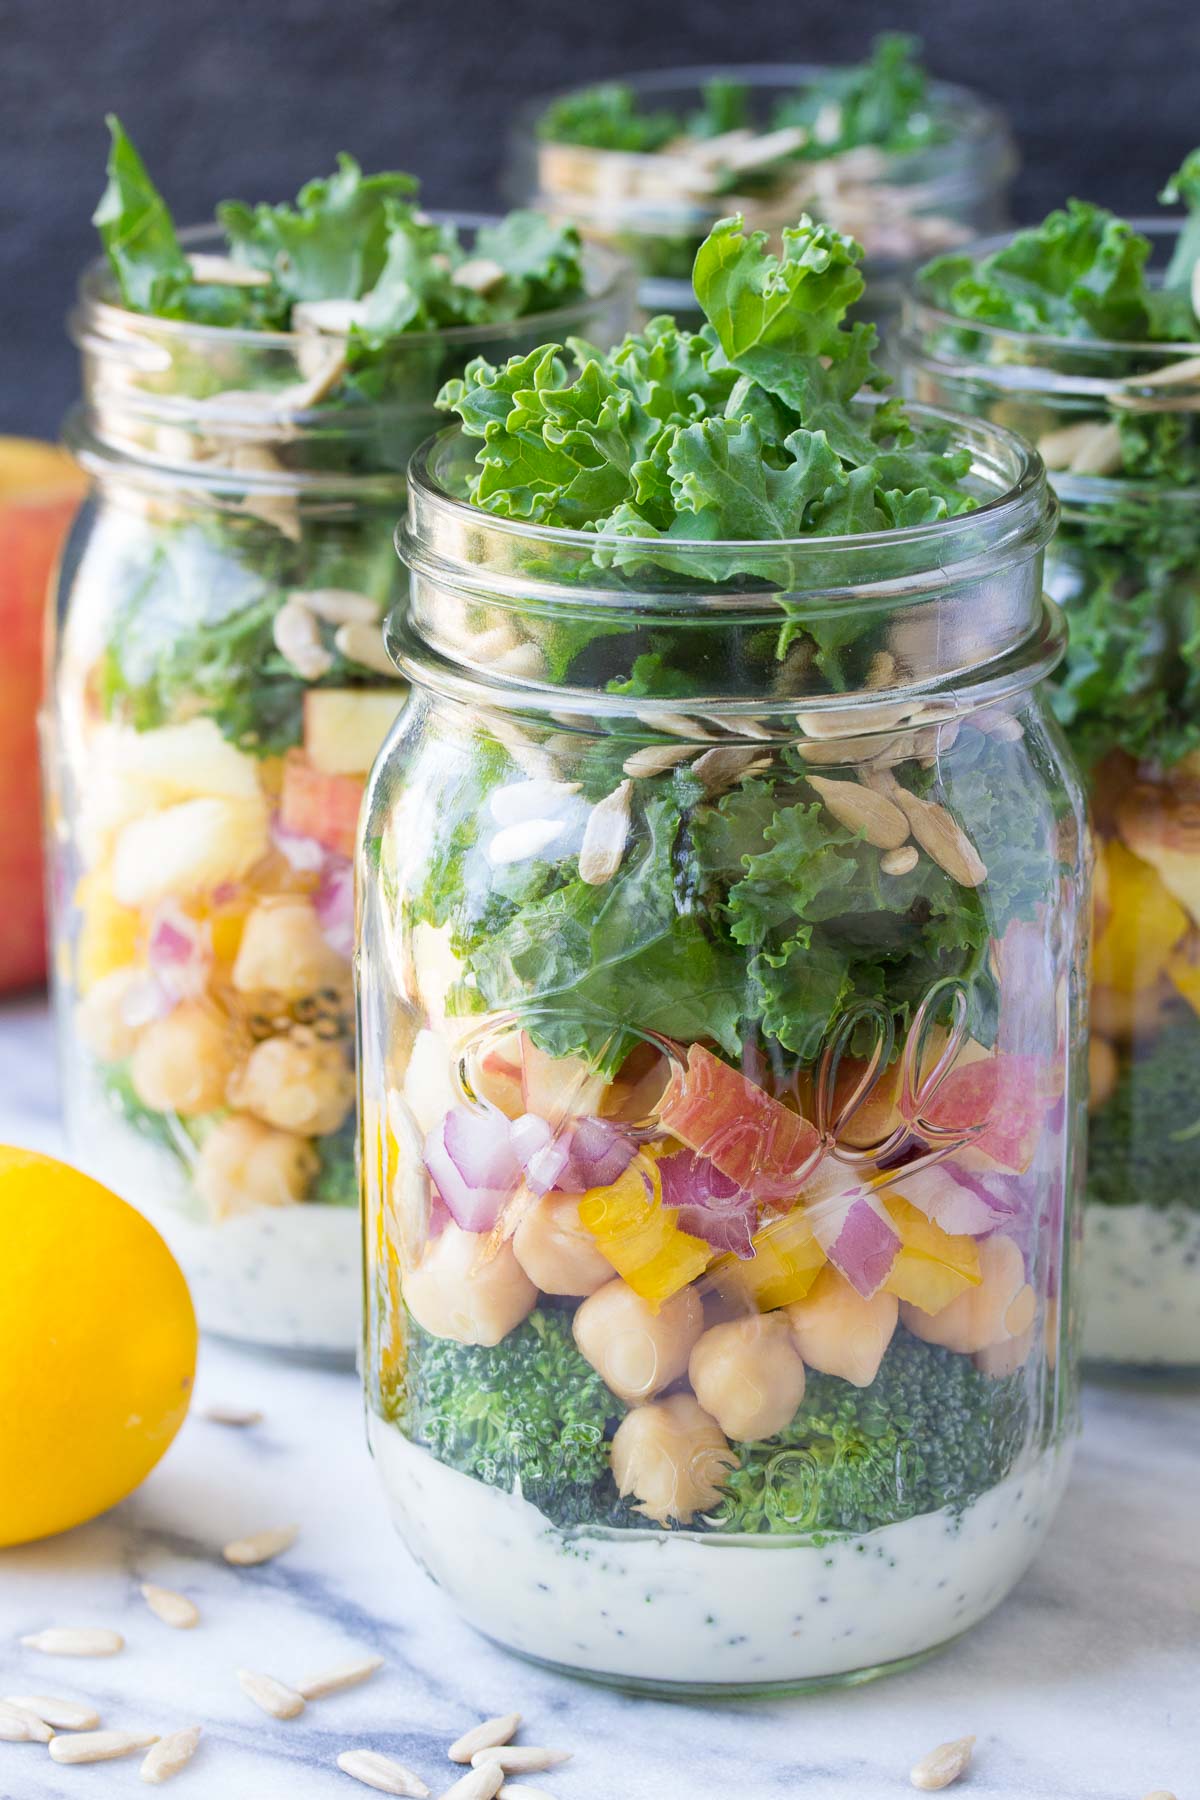 These easy vegetarian Mason Jar Broccoli Salads with Kale and Apple are a yummy make ahead lunch option! | www.kristineskitchenblog.com